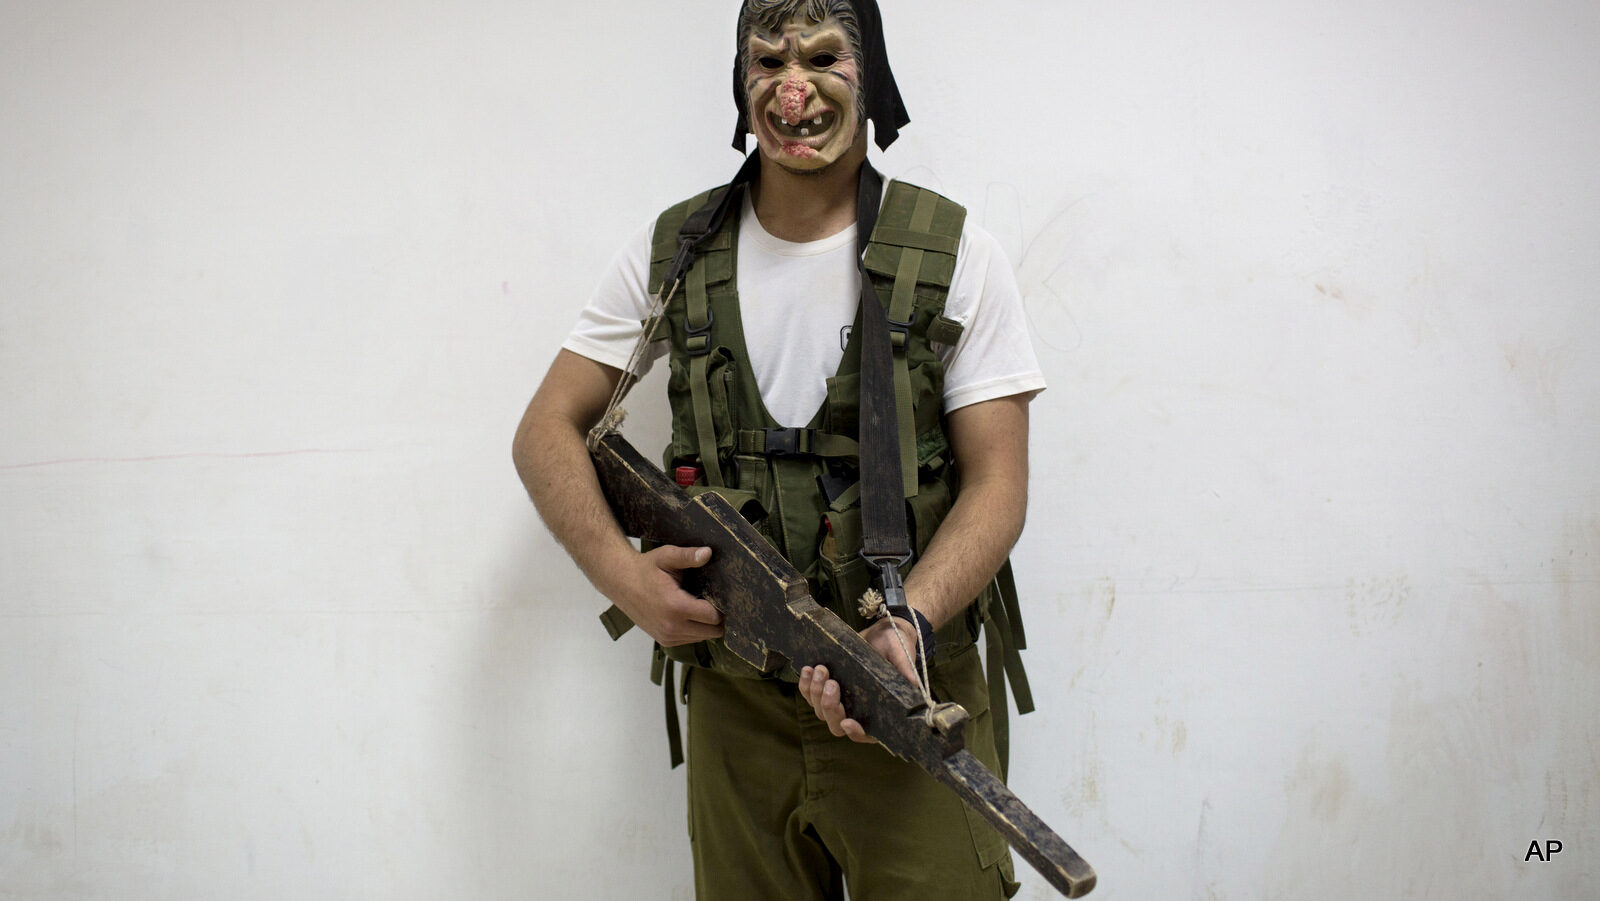 An Israeli high-school senior poses for a photograph as he wears a mask during urban fighting drill as part of privately run military combat fitness training as part of privately run military combat fitness training to prepare for national military service in Israeli settlement of Mizra, northern Israel. March 24, 2015.